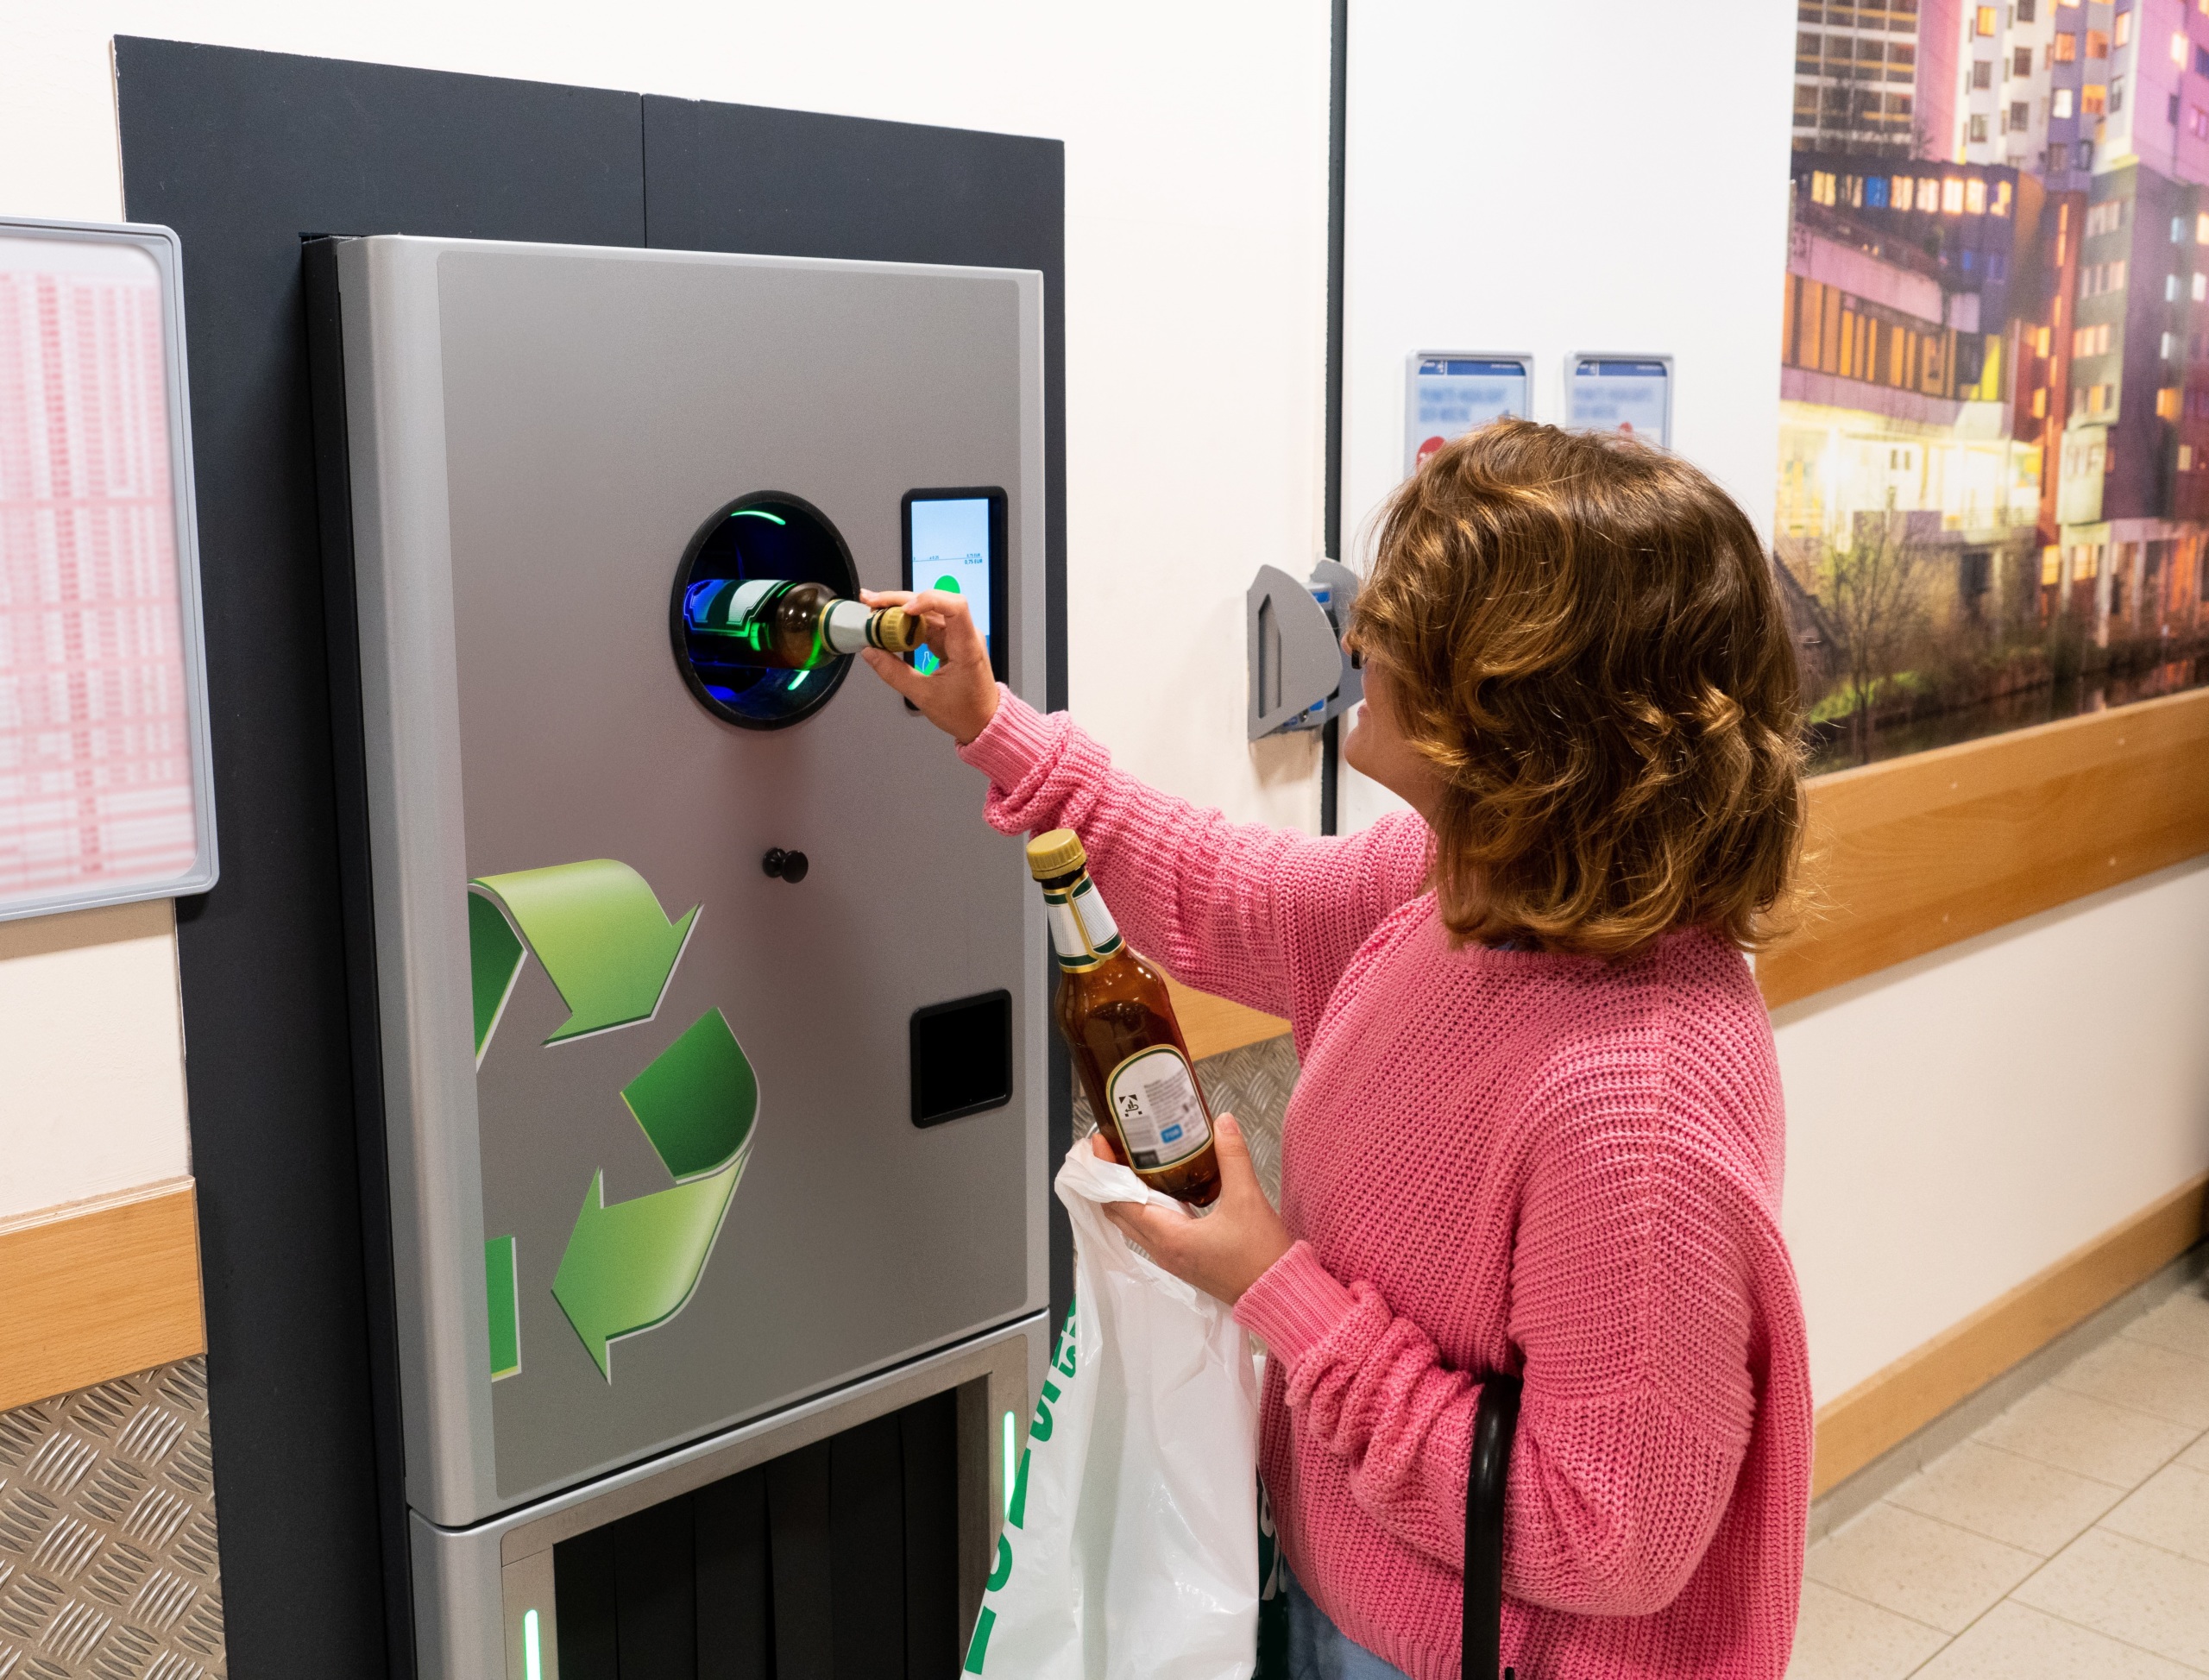 A woman inserts glass bottles into a machine for recycling.